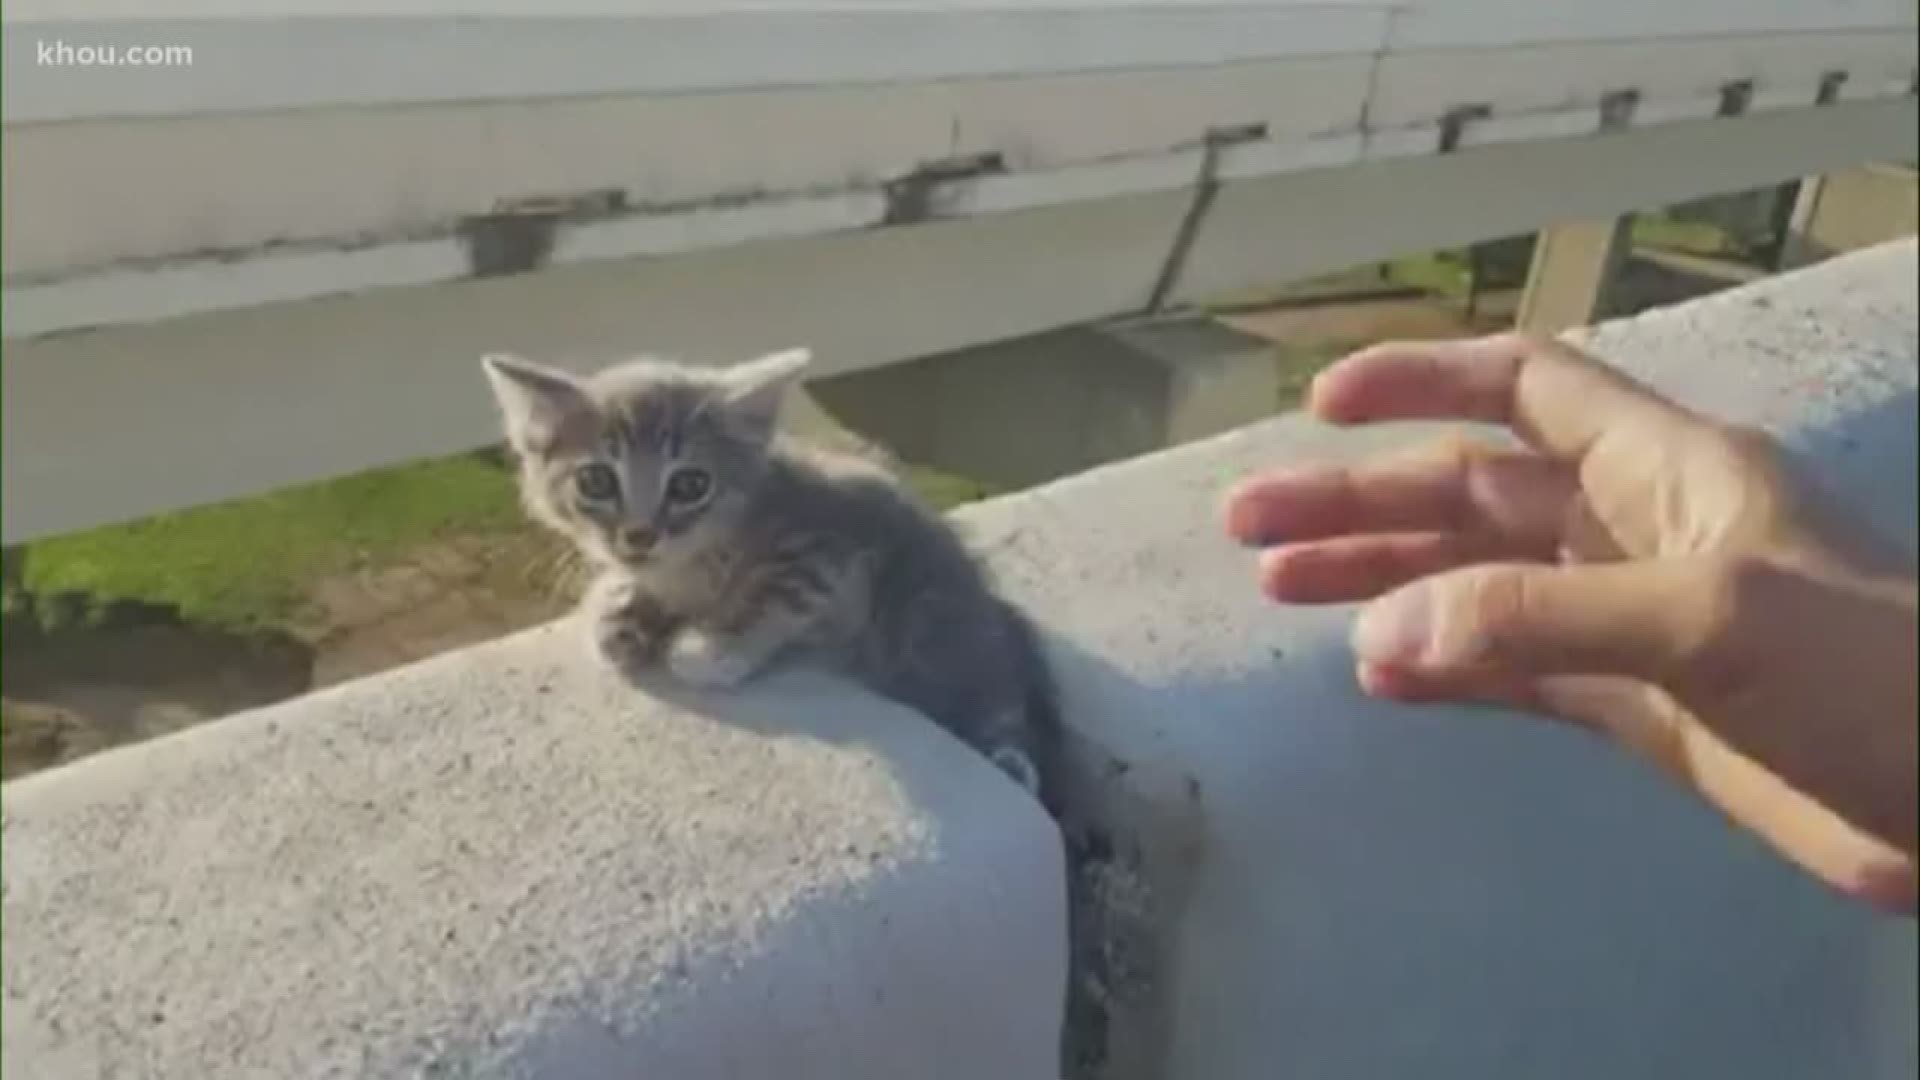 A man couldn't believe his eyes when he saw a tiny kitten stranded on a concrete barrier along Highway 59 near Minute Maid Park. Sadly, it's not the first time we've seen something like this, which begs the question, how does this happen?